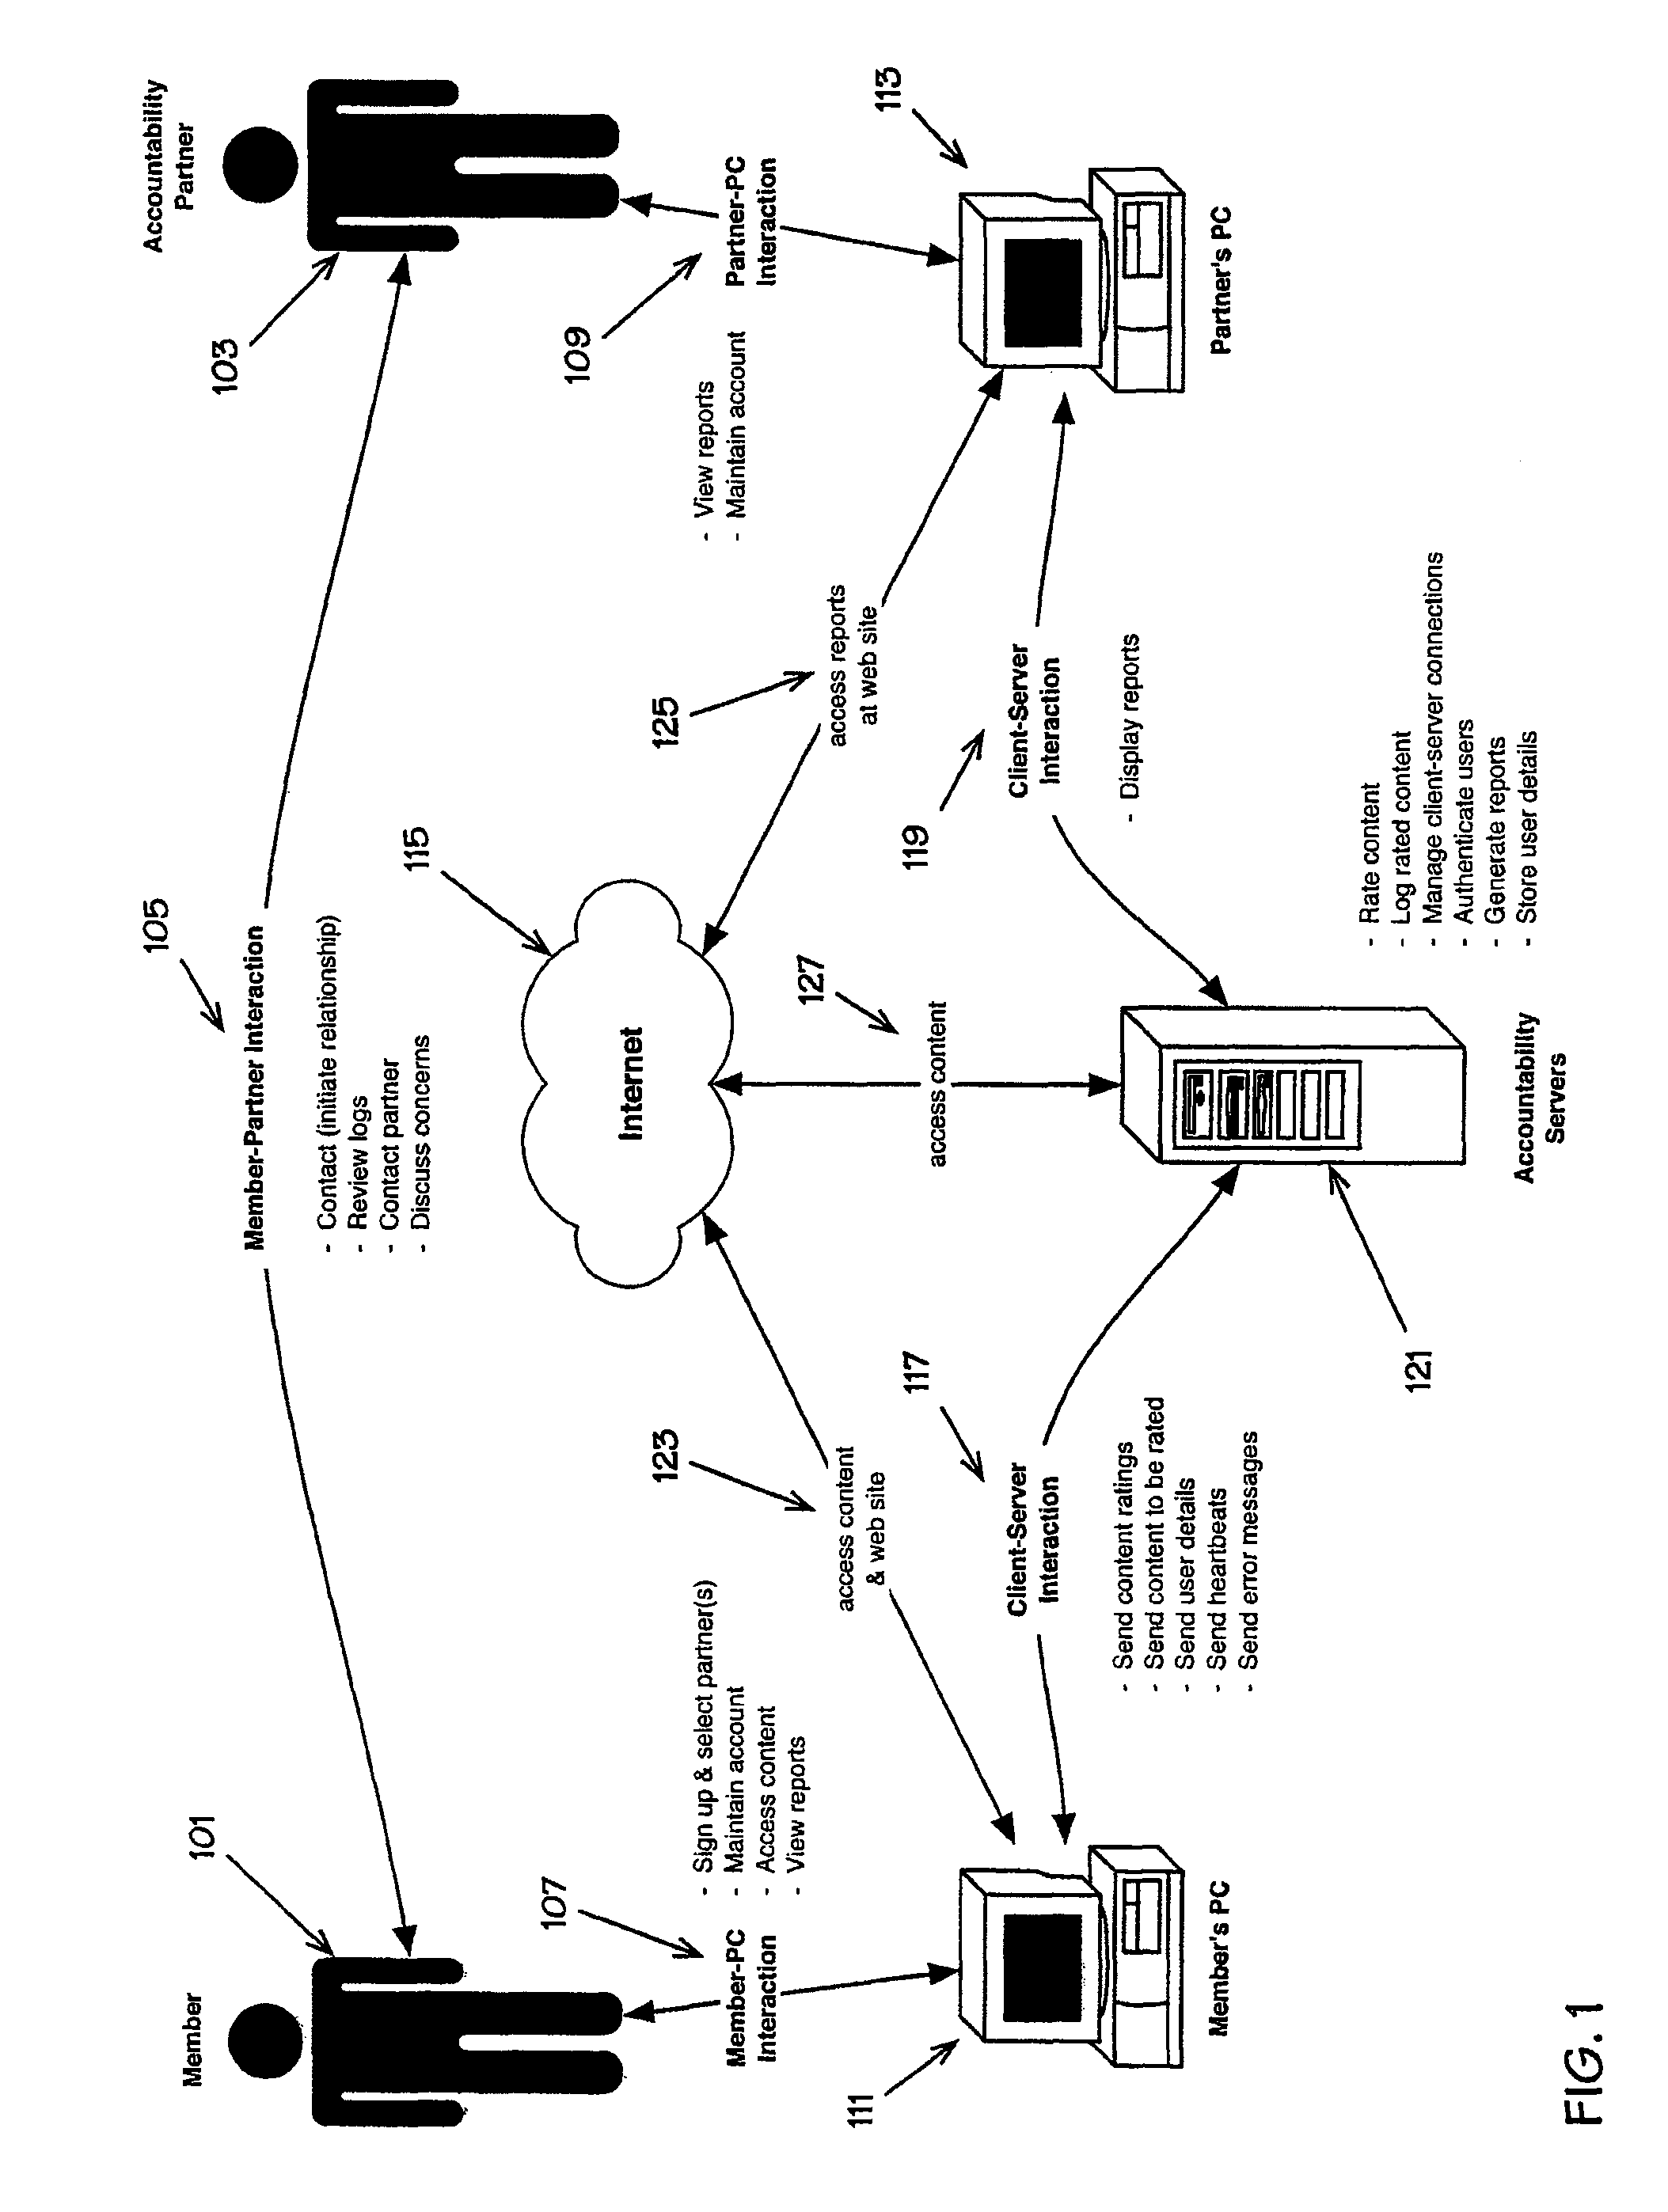 Systems and methods for multi-layered packet filtering and remote management of network devices